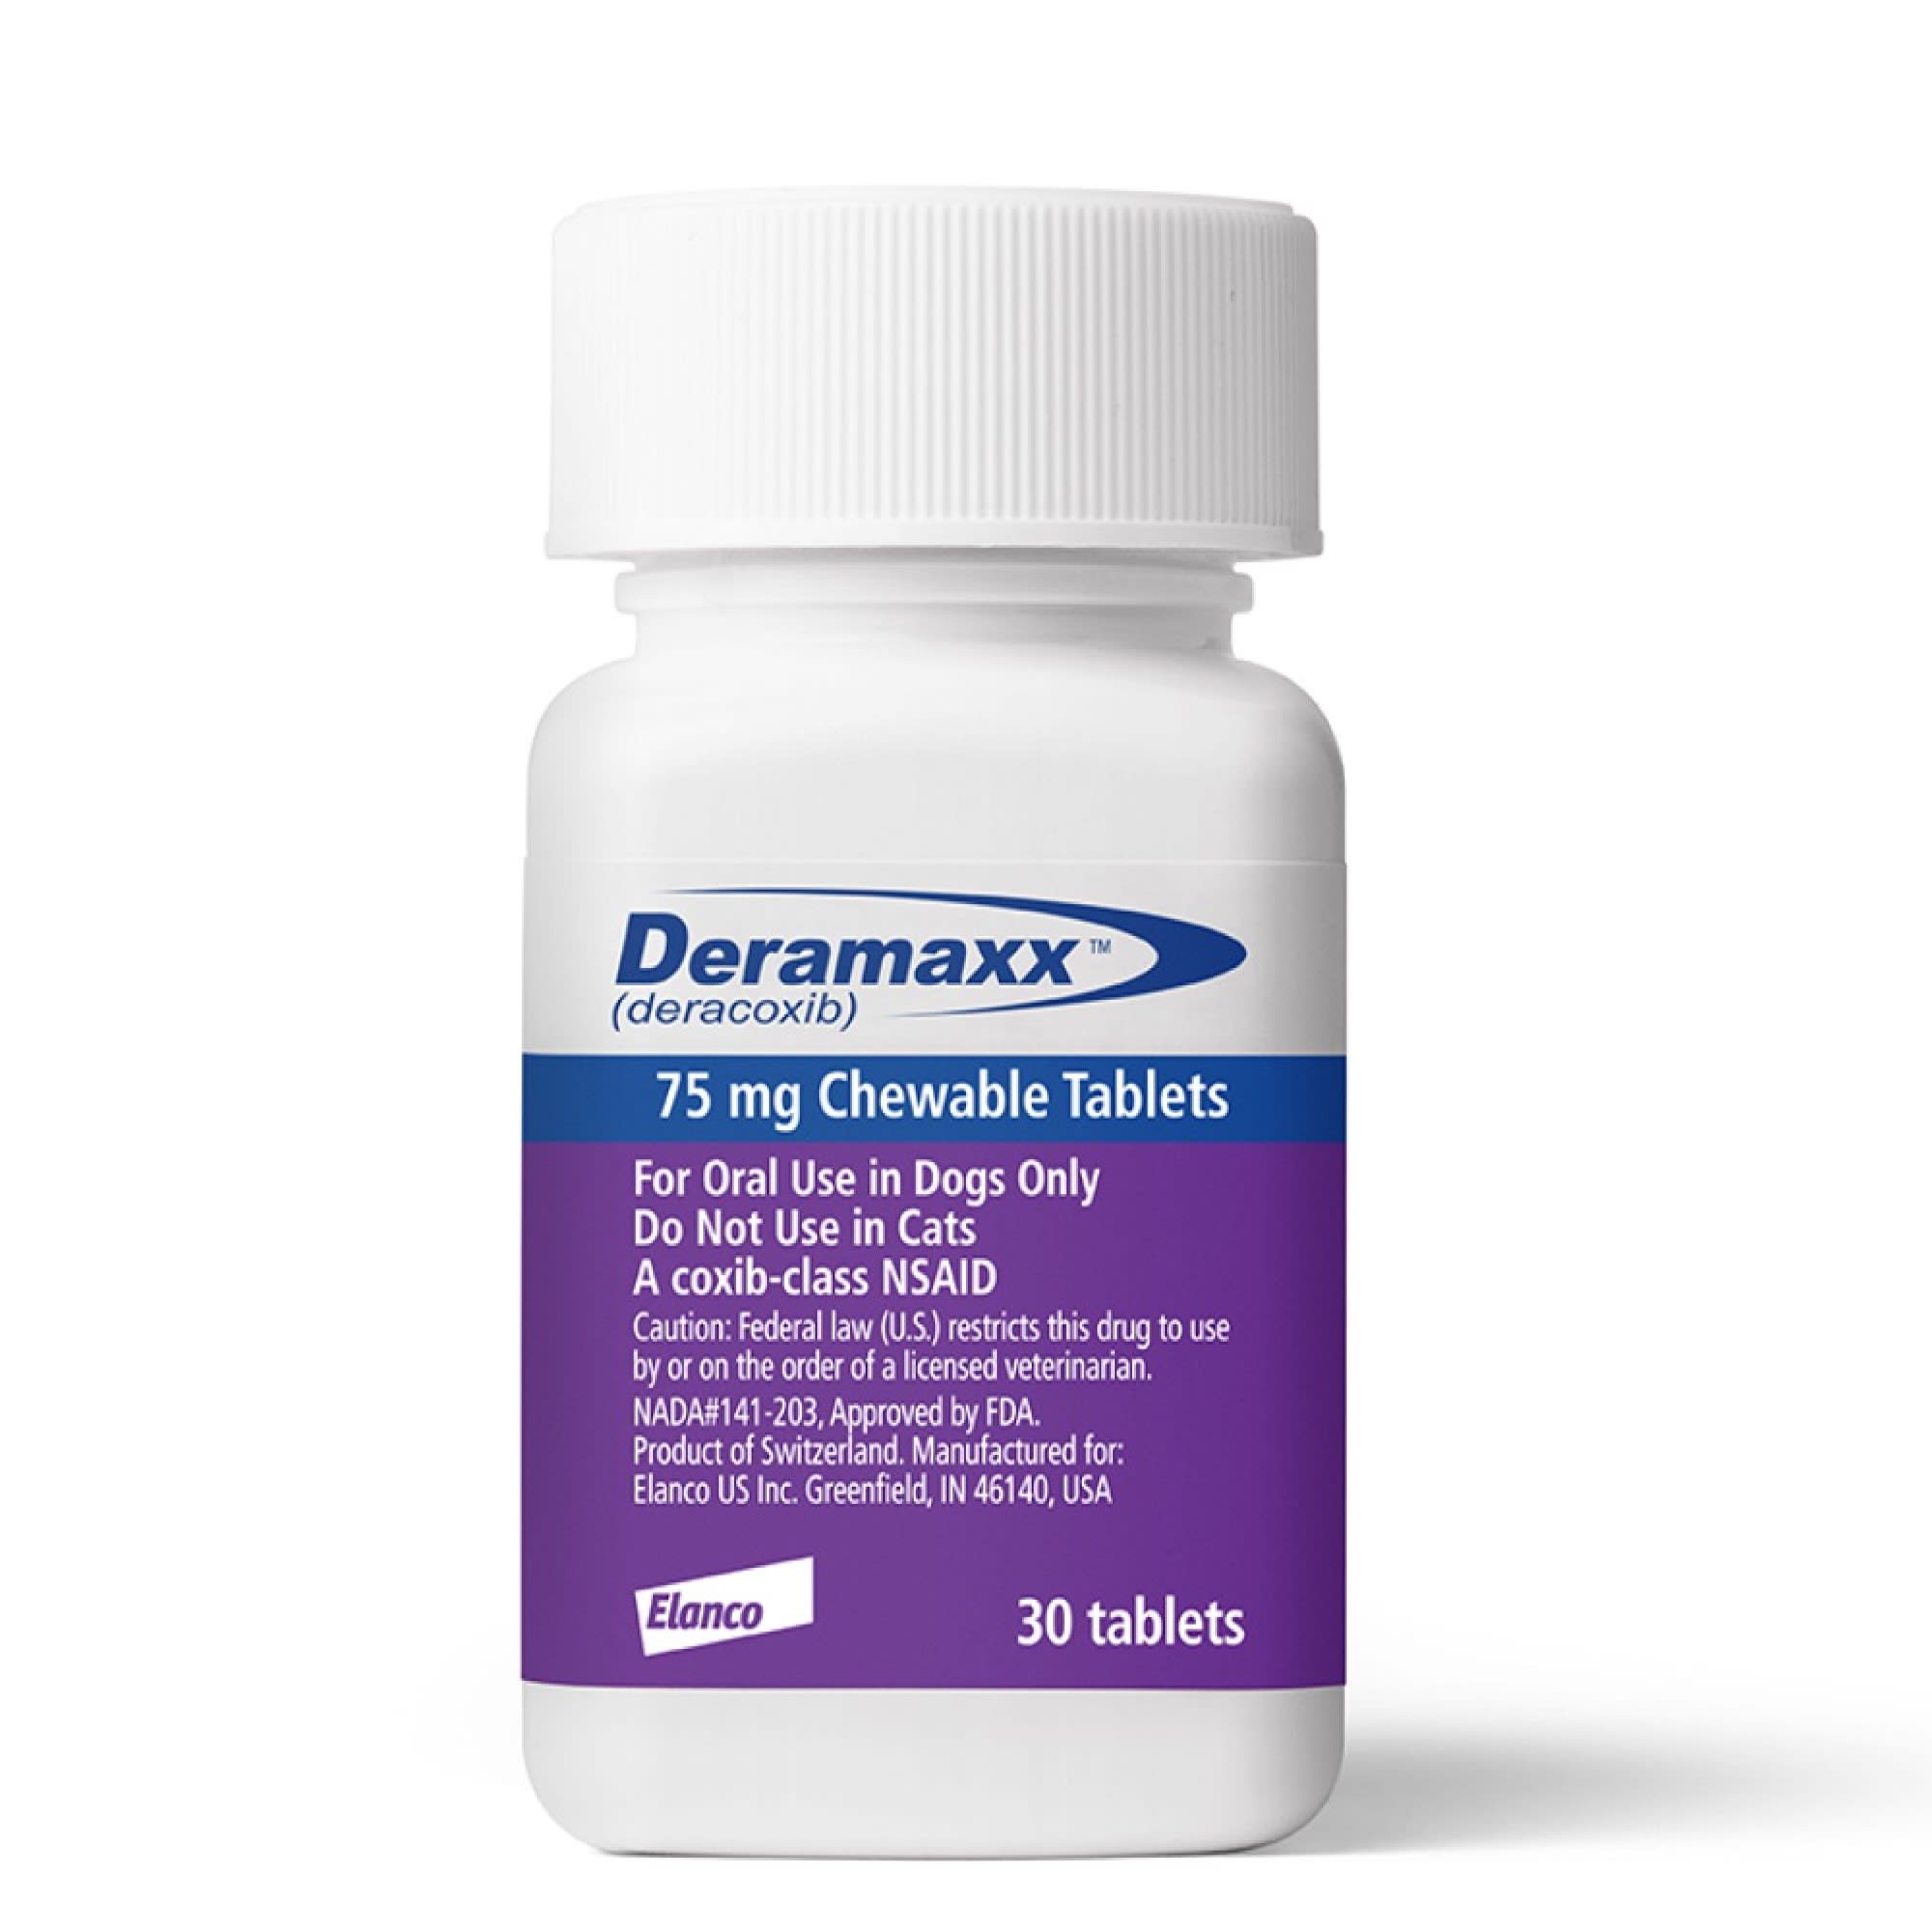 Deramaxx 75 mg Chewable Tablets for 